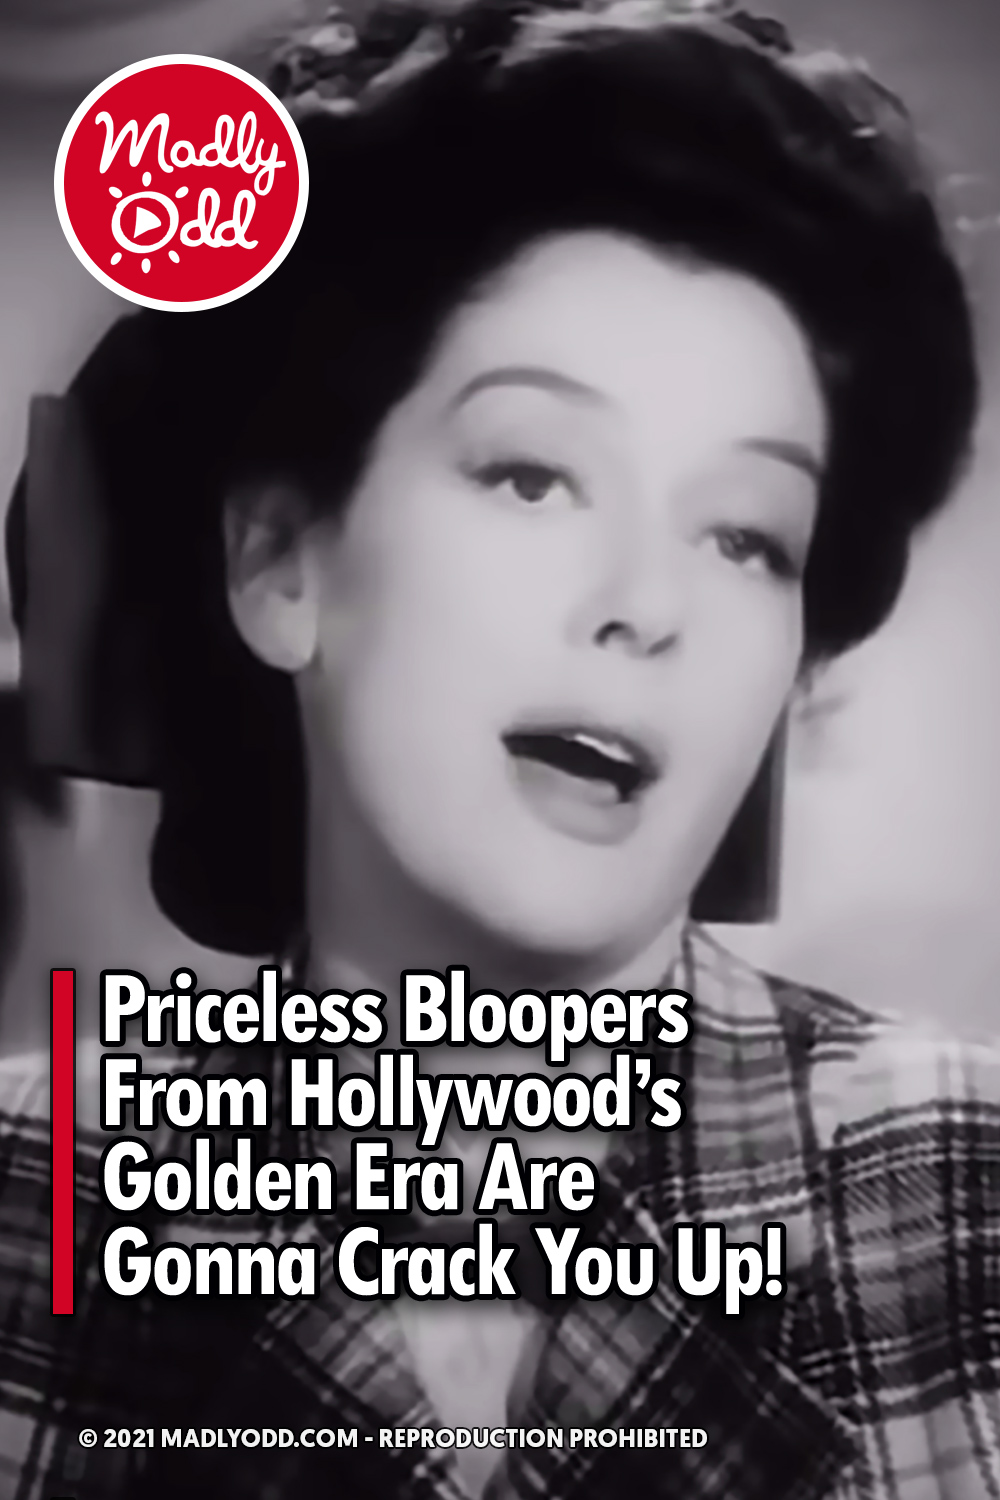 Priceless Bloopers From Hollywood’s Golden Era Are Gonna Crack You Up!